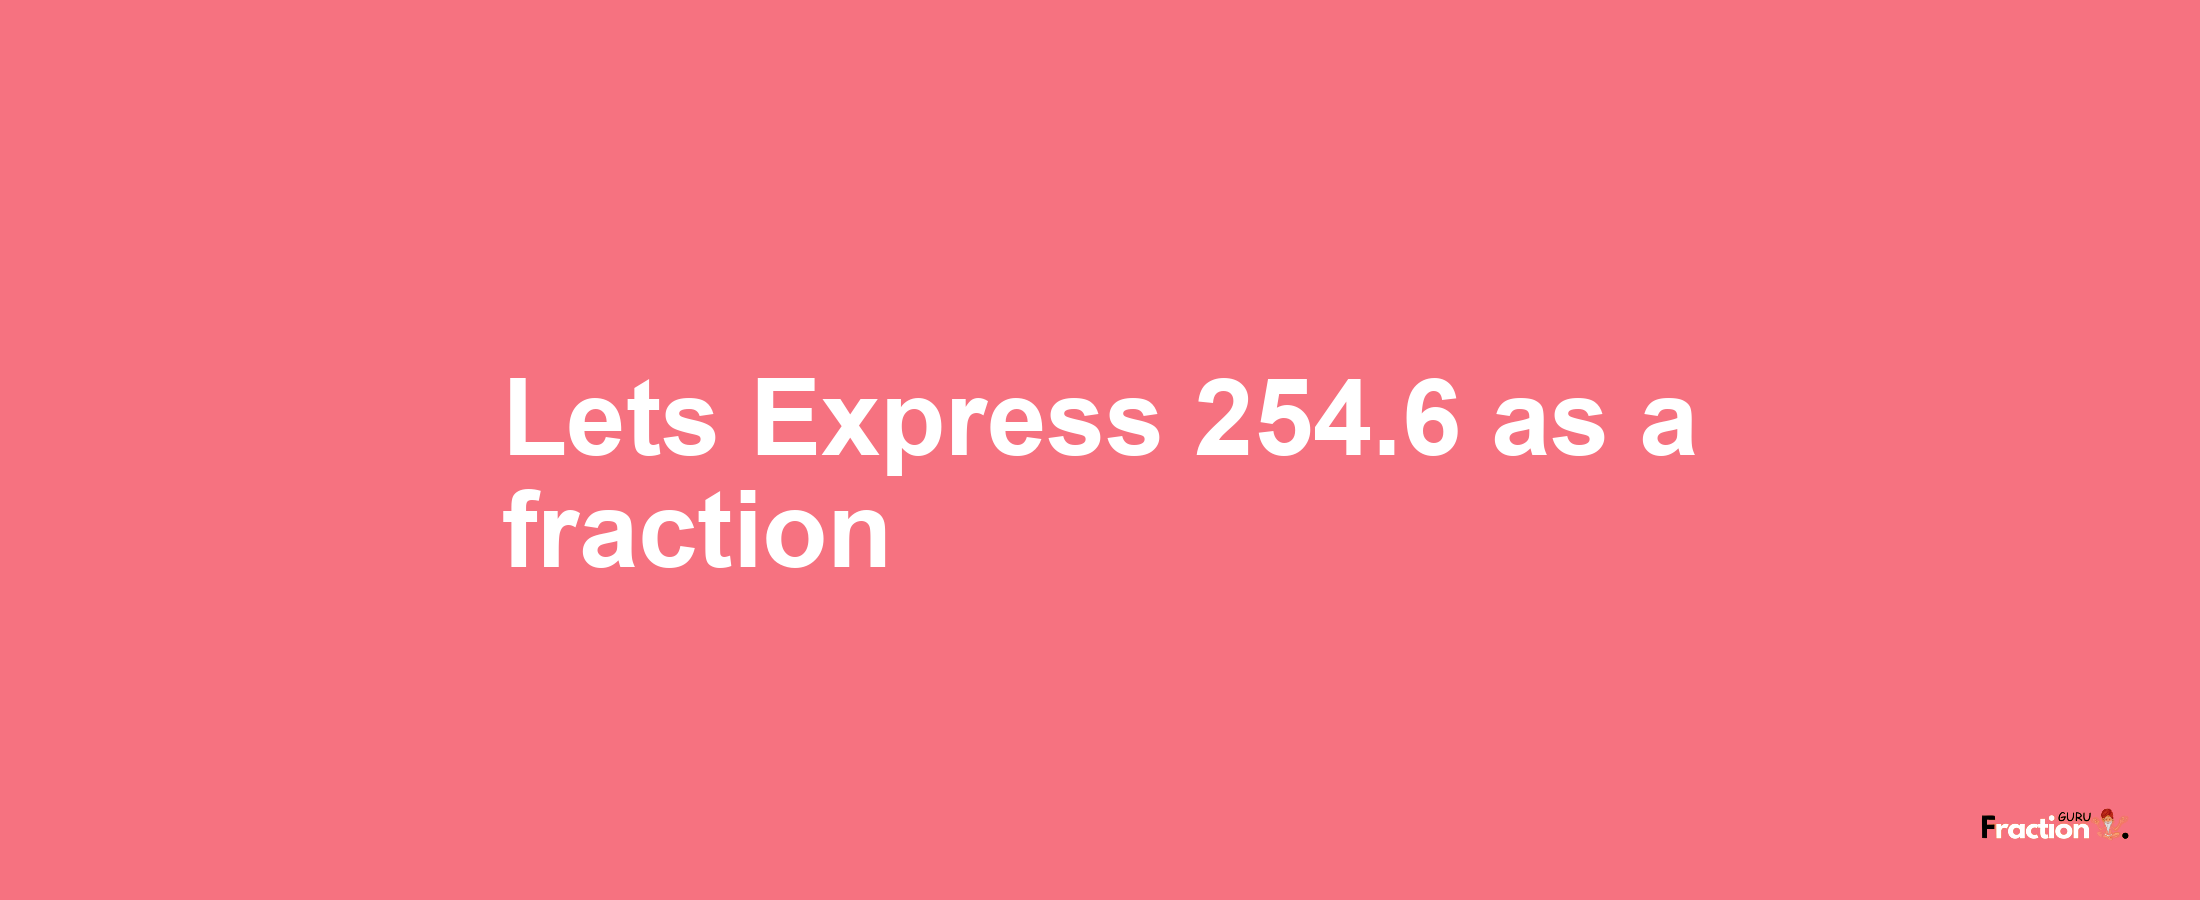 Lets Express 254.6 as afraction